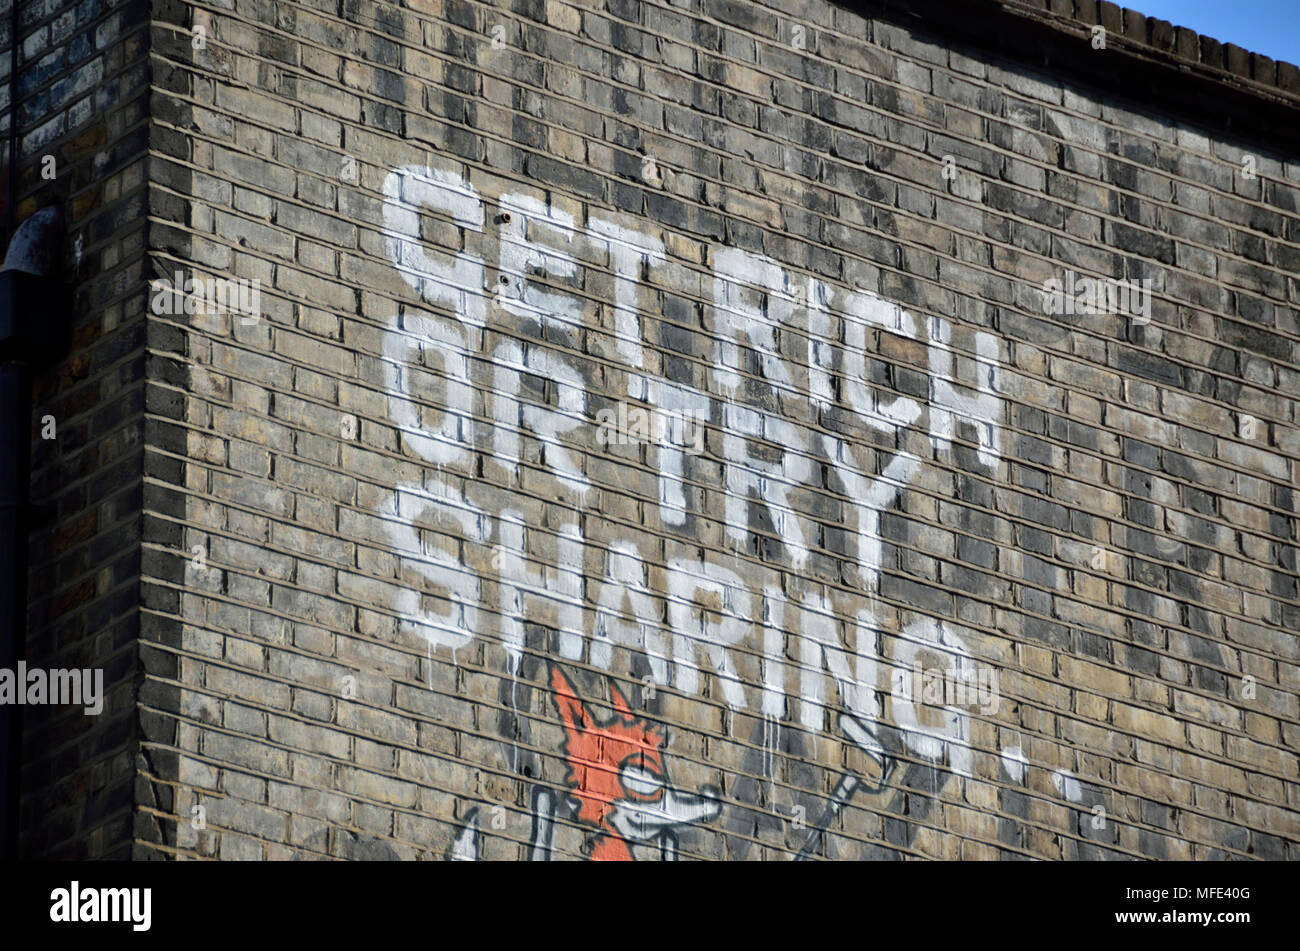 ’Get rich or try sharing’ slogan painted on a wall Stock Photo